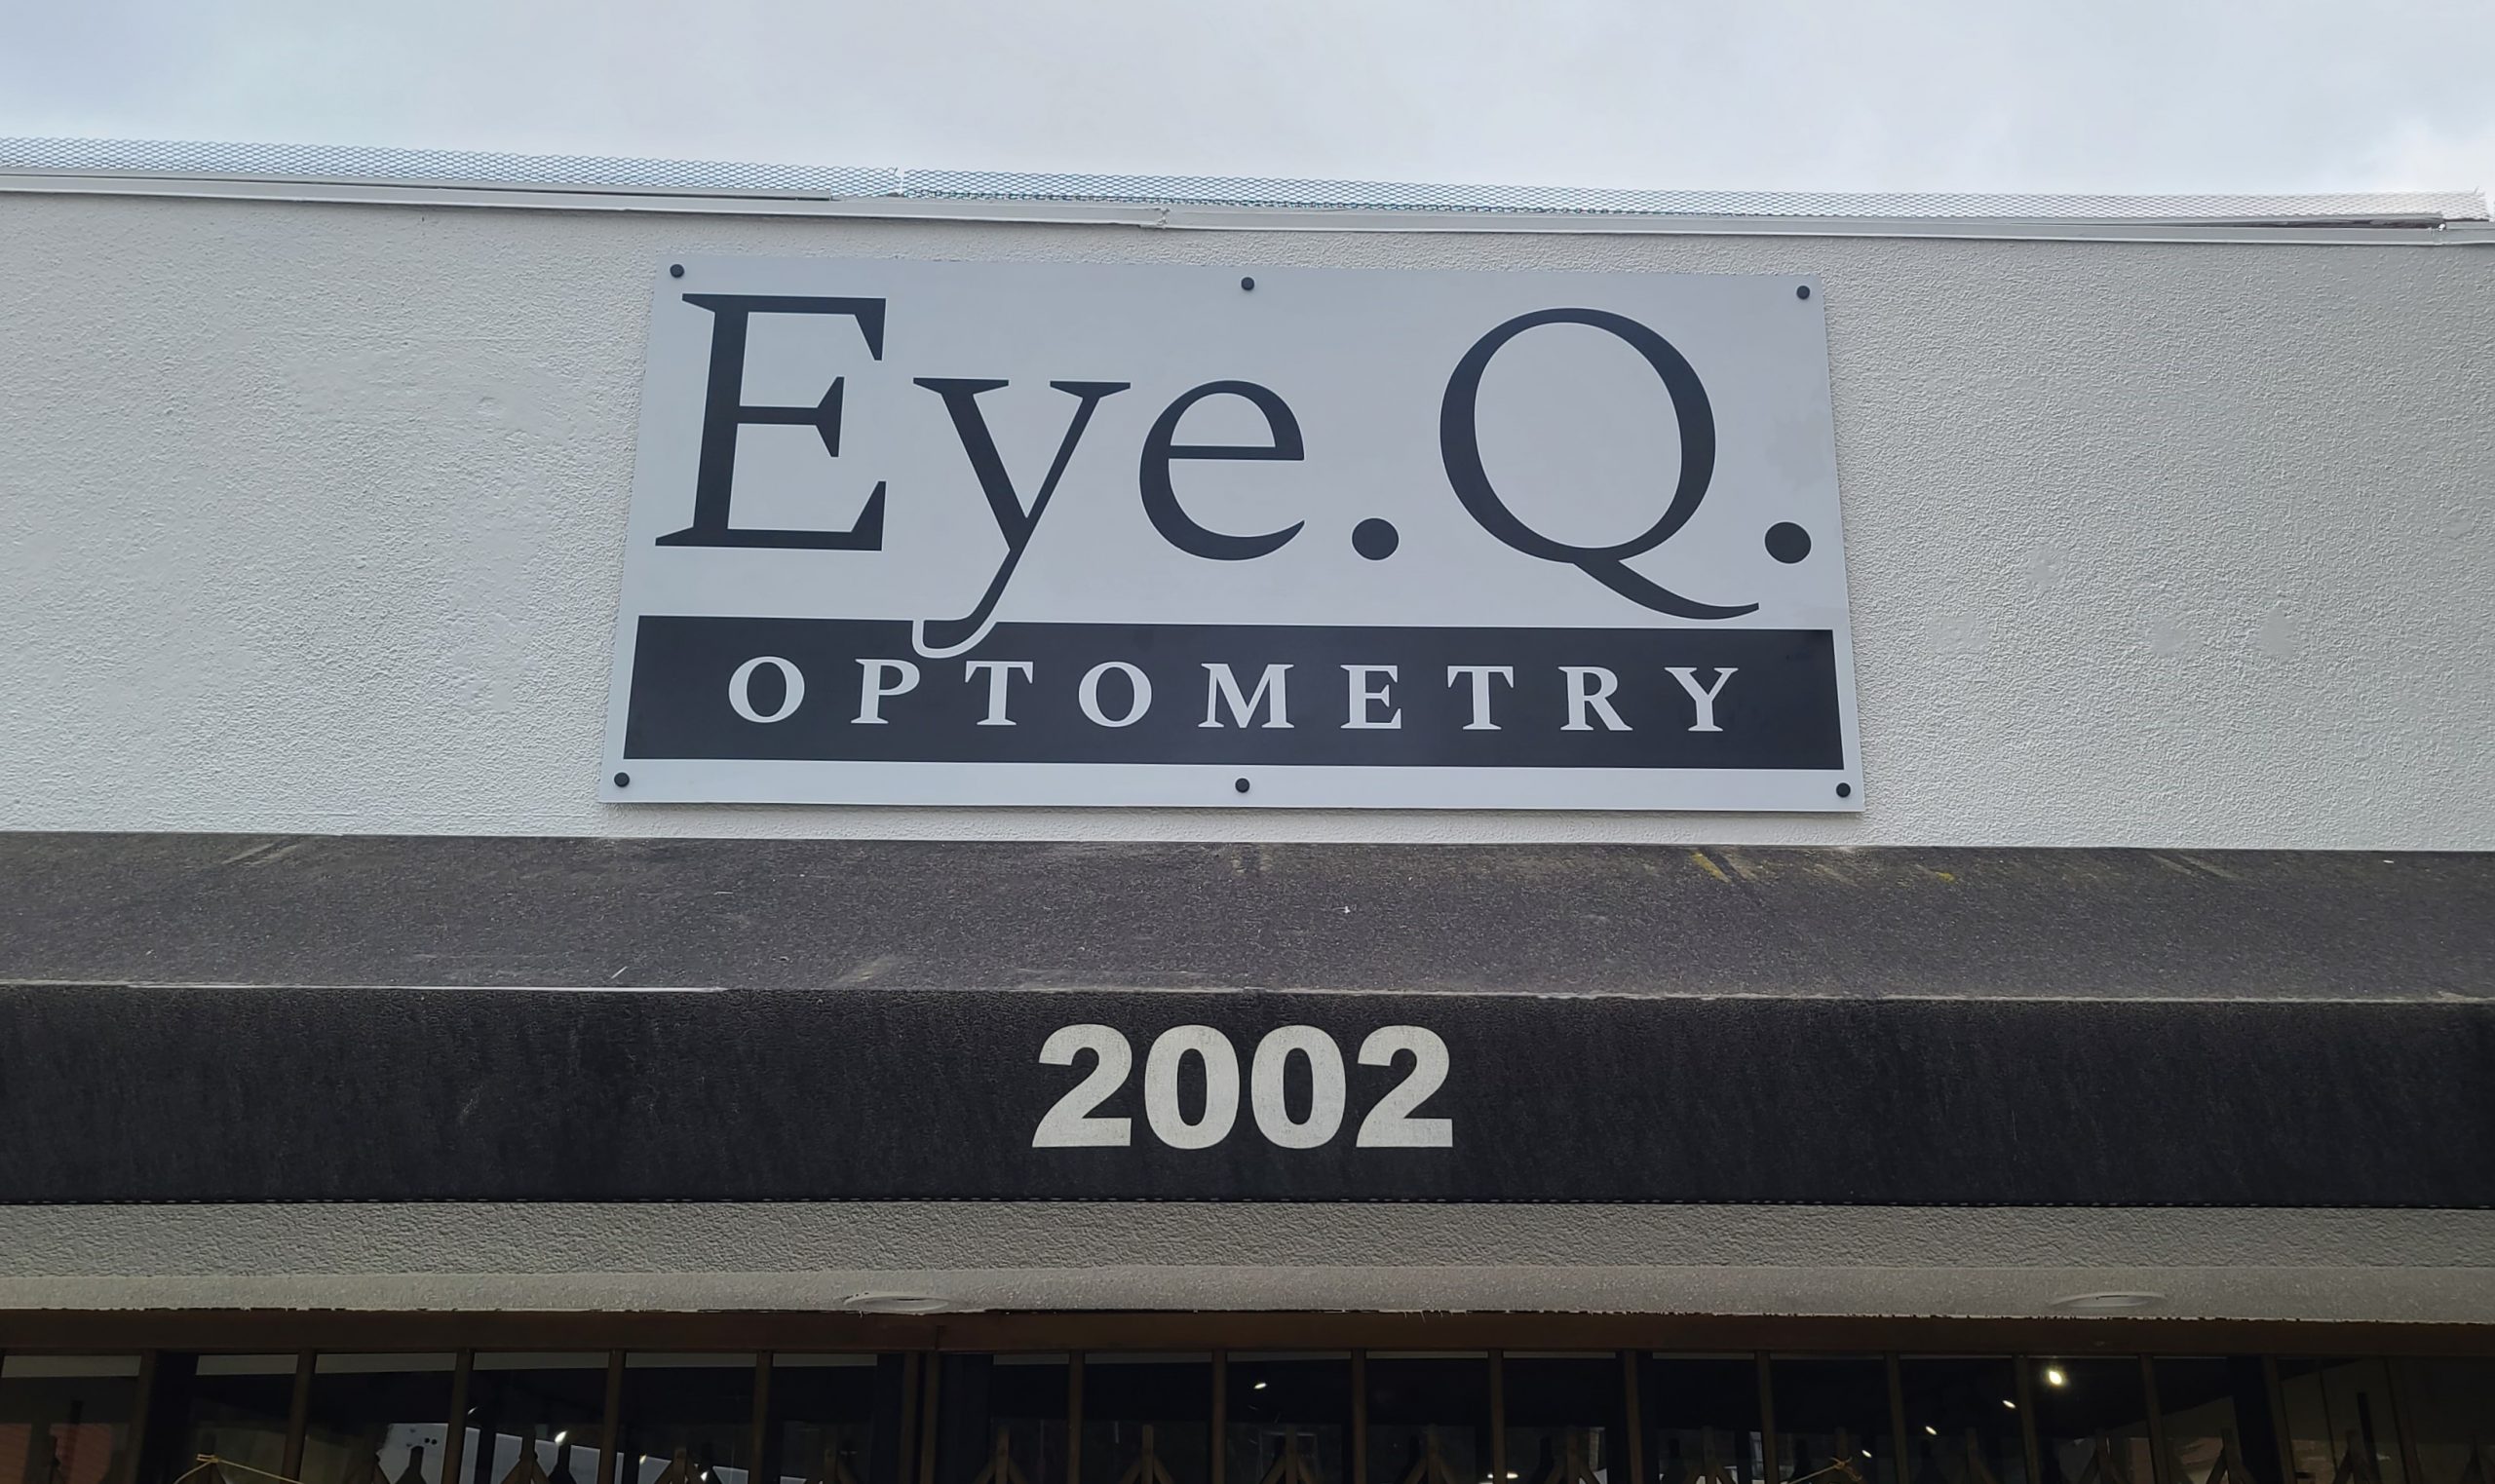 Our hand-painted sign for Eye Q Optometry in Los Angeles. Because nothing can replace the attention to detail that comes with hand-painted designs.